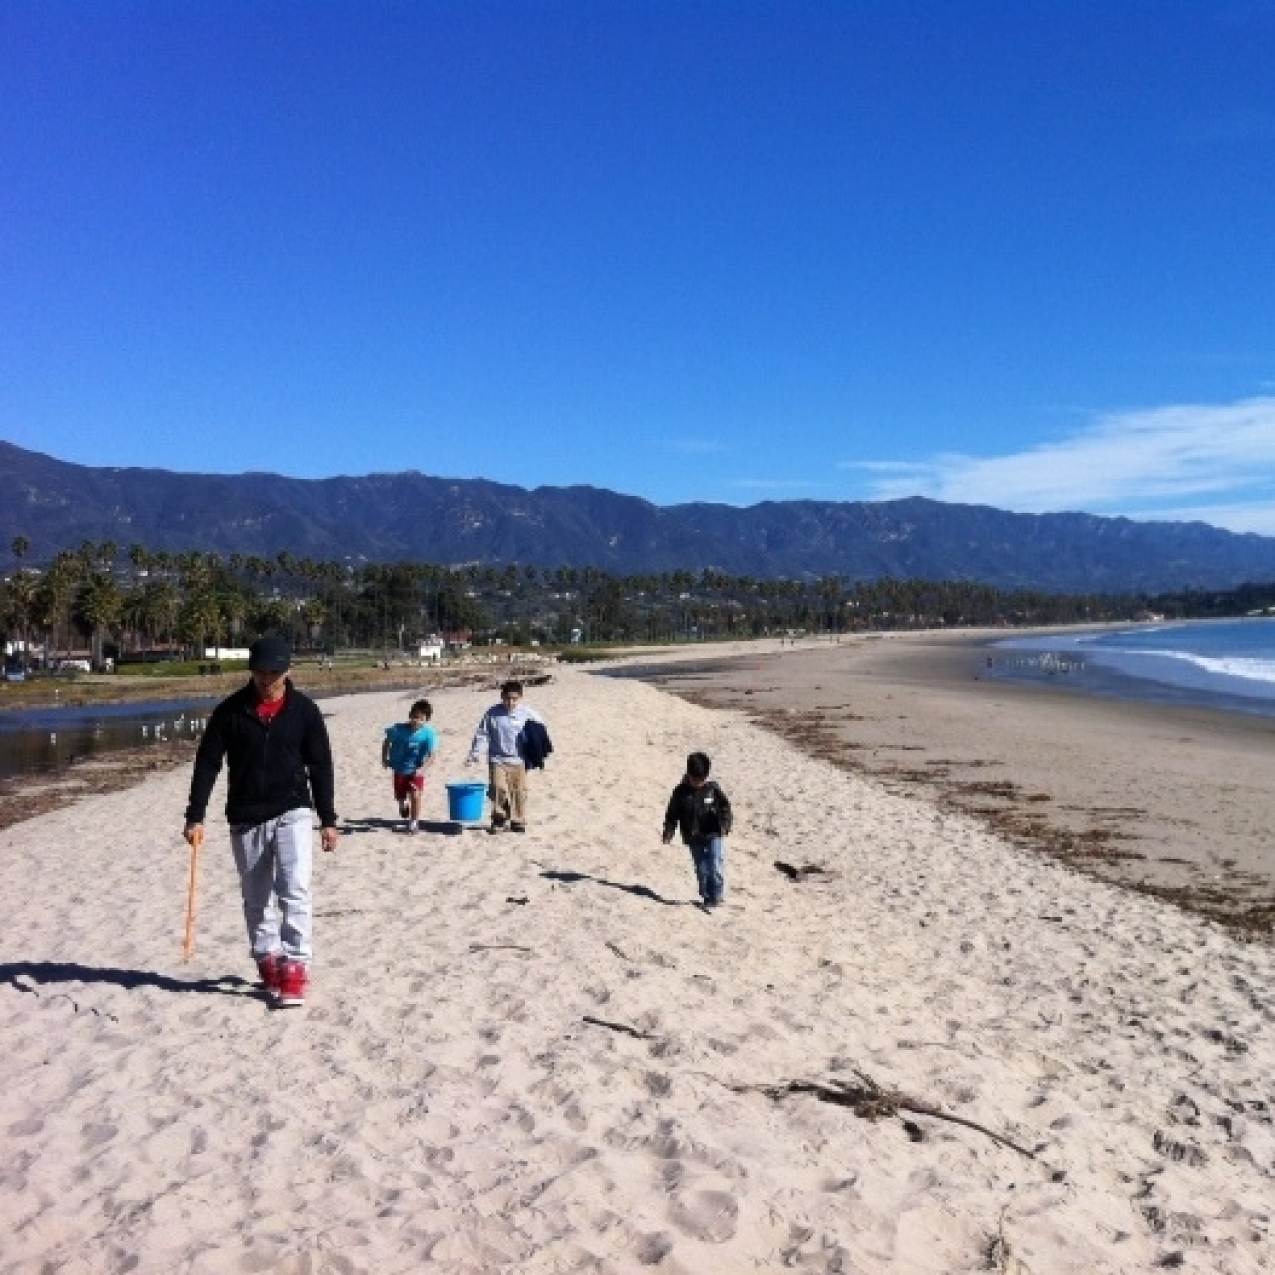  Three students and an adult walking along an empty beach.